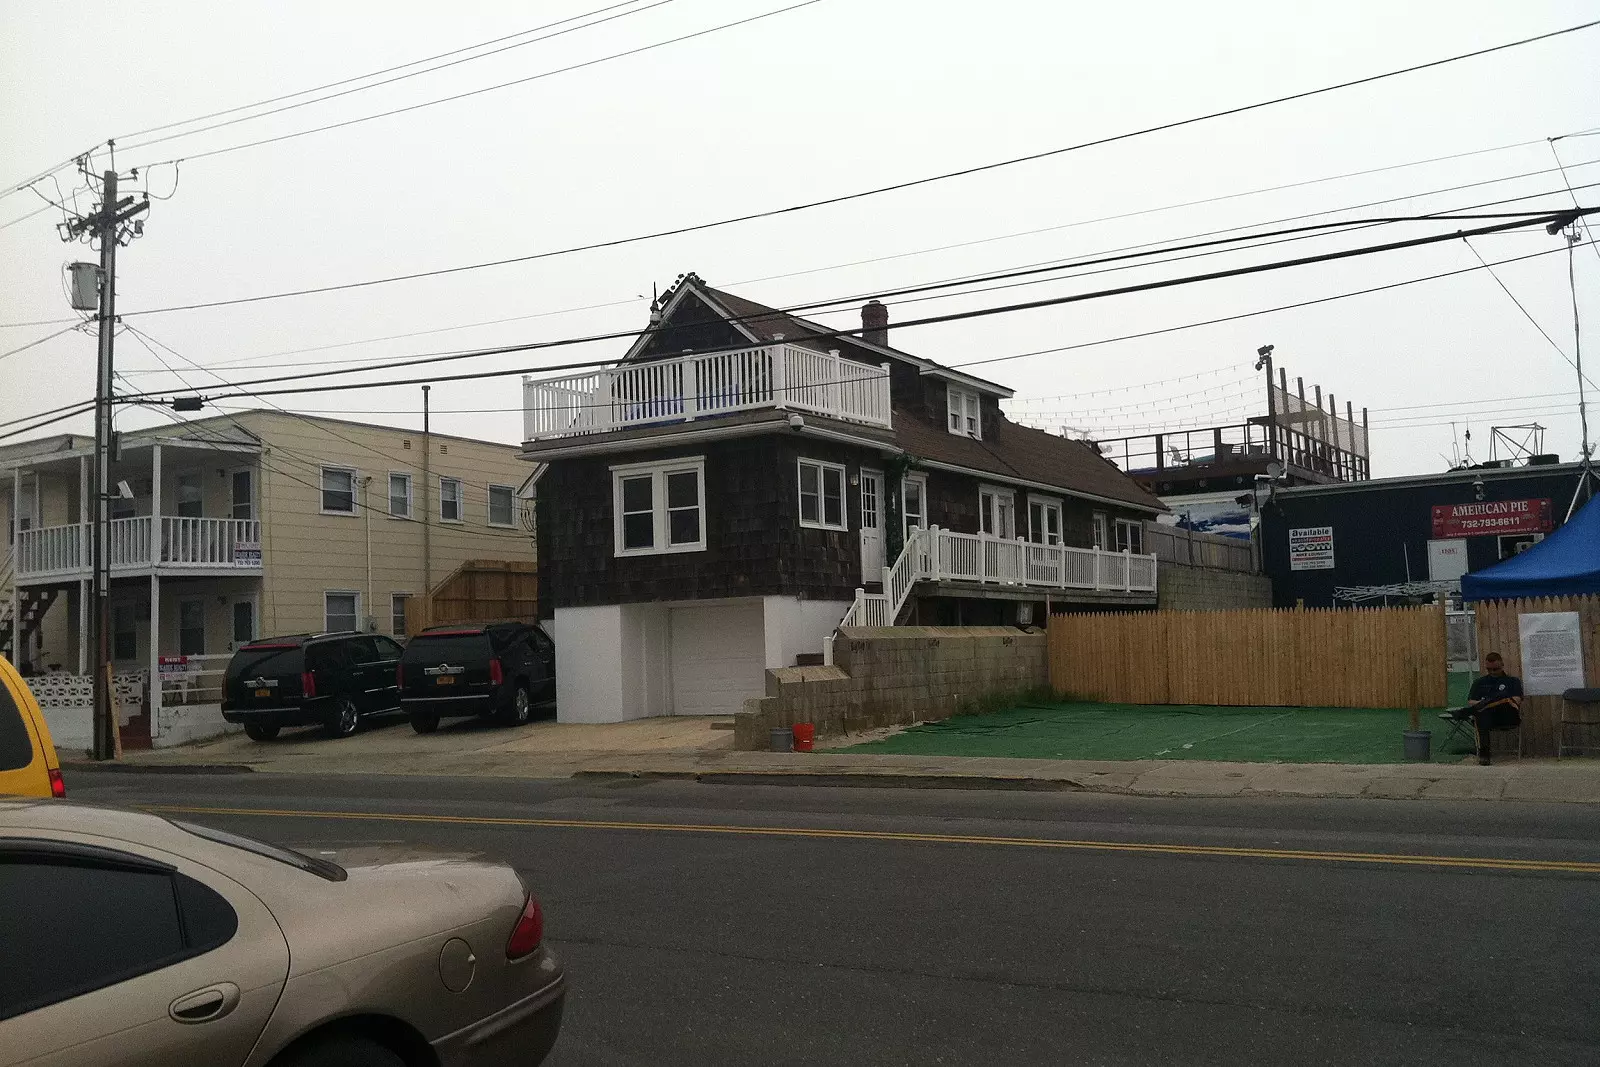 Want to rent the 'Jersey Shore' house this summer? Fuhgeddaboudit